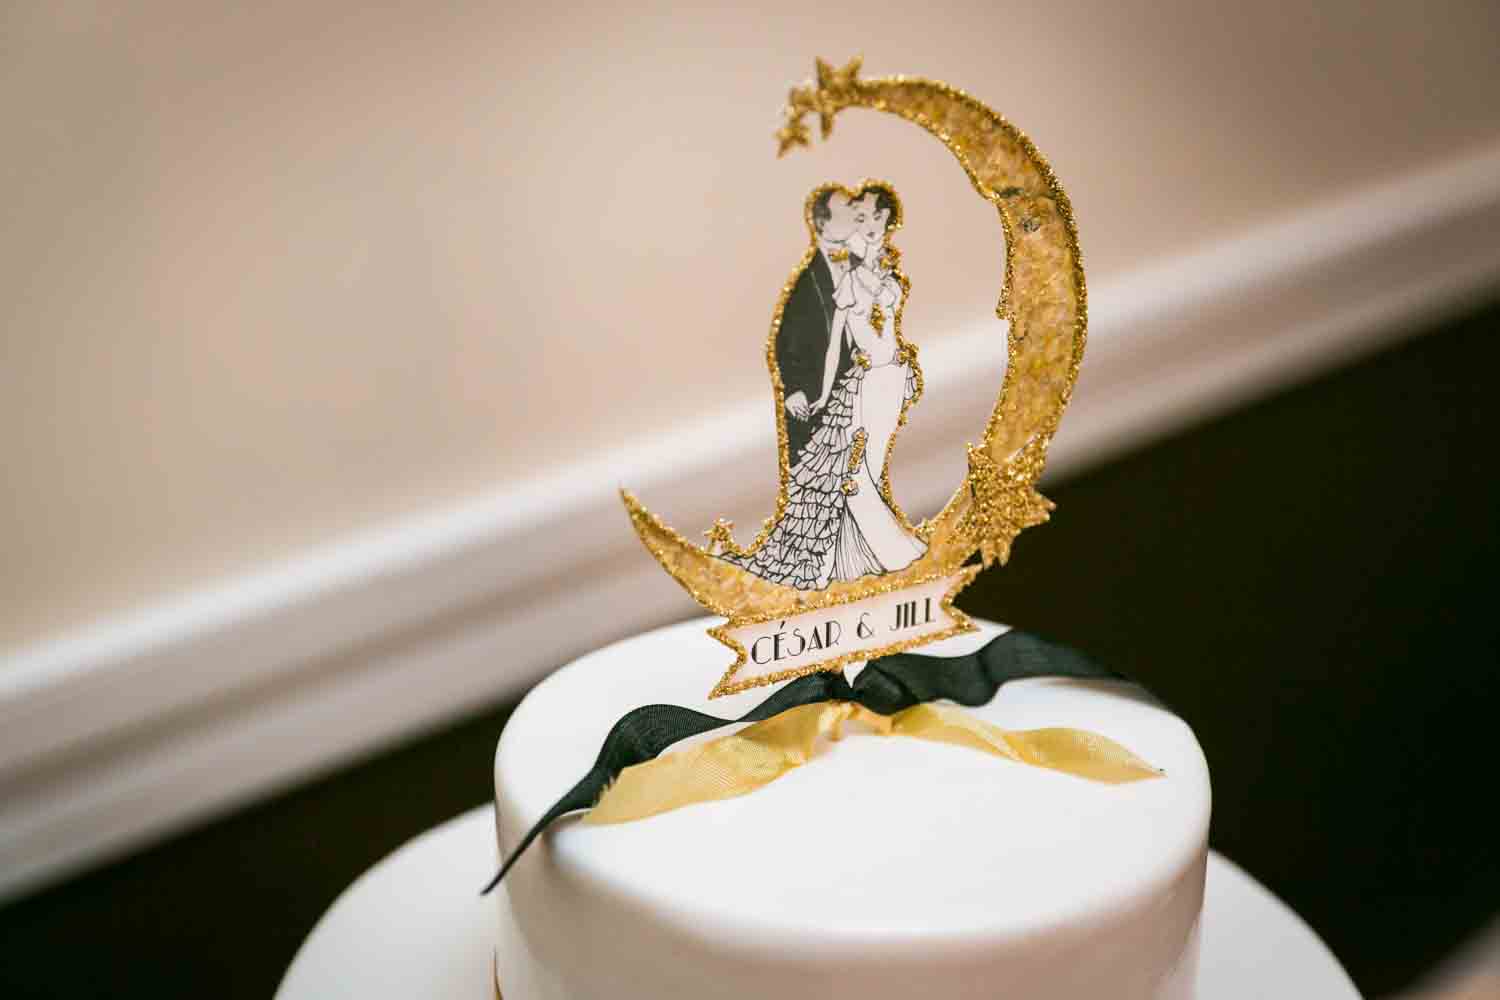 1920s theme wedding cake topper with moon and bride and groom